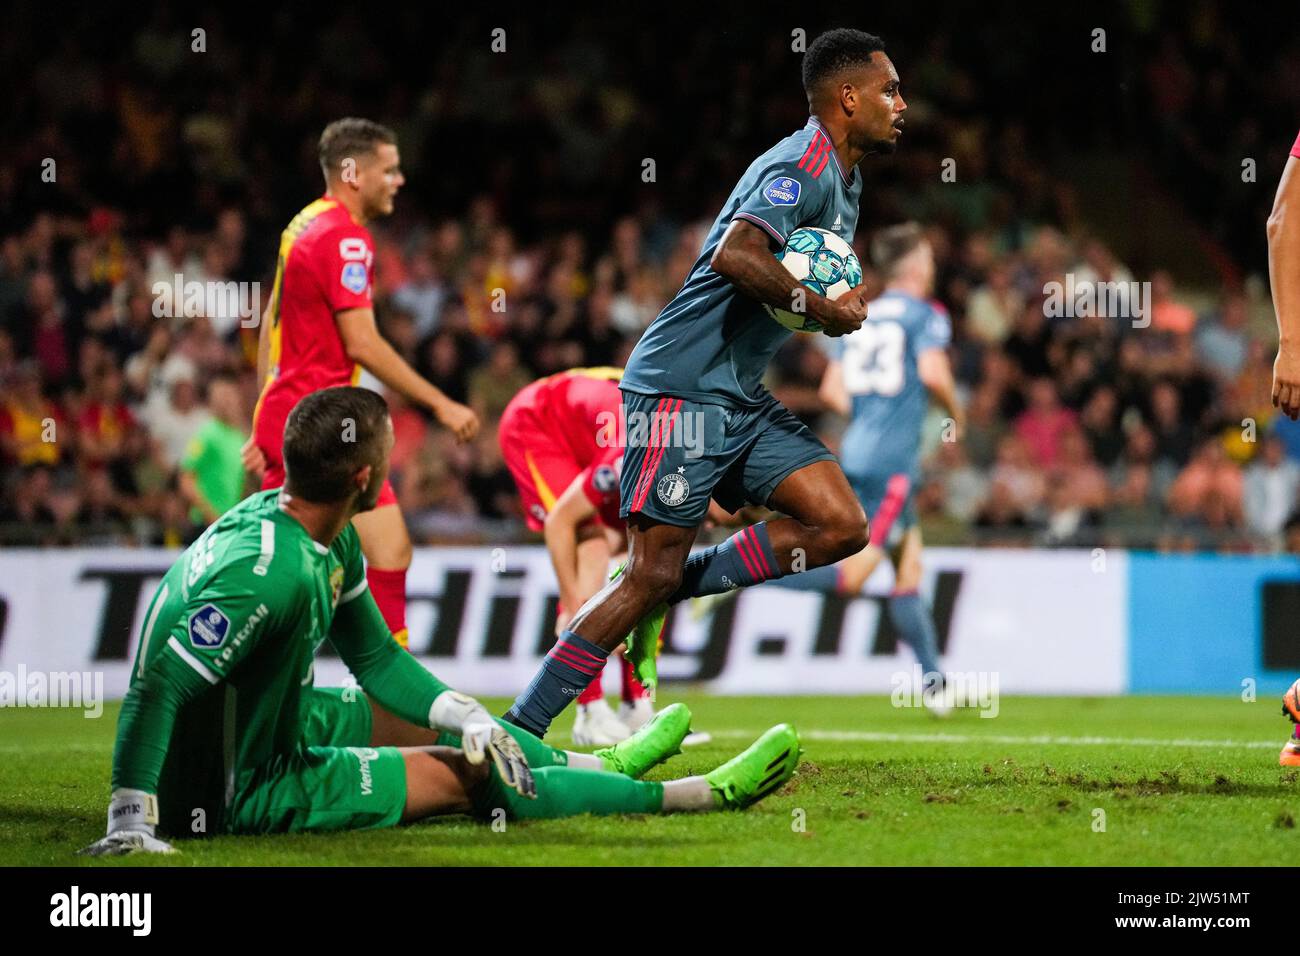 Deventer - Danilo Pereira da Silva of Feyenoord celebrates the 2-1 during the match between Go Ahead Eagles v Feyenoord  at De Adelaarshorst on 3 September 2022 in Deventer, Netherlands. (Box to Box Pictures/Tom Bode) Stock Photo